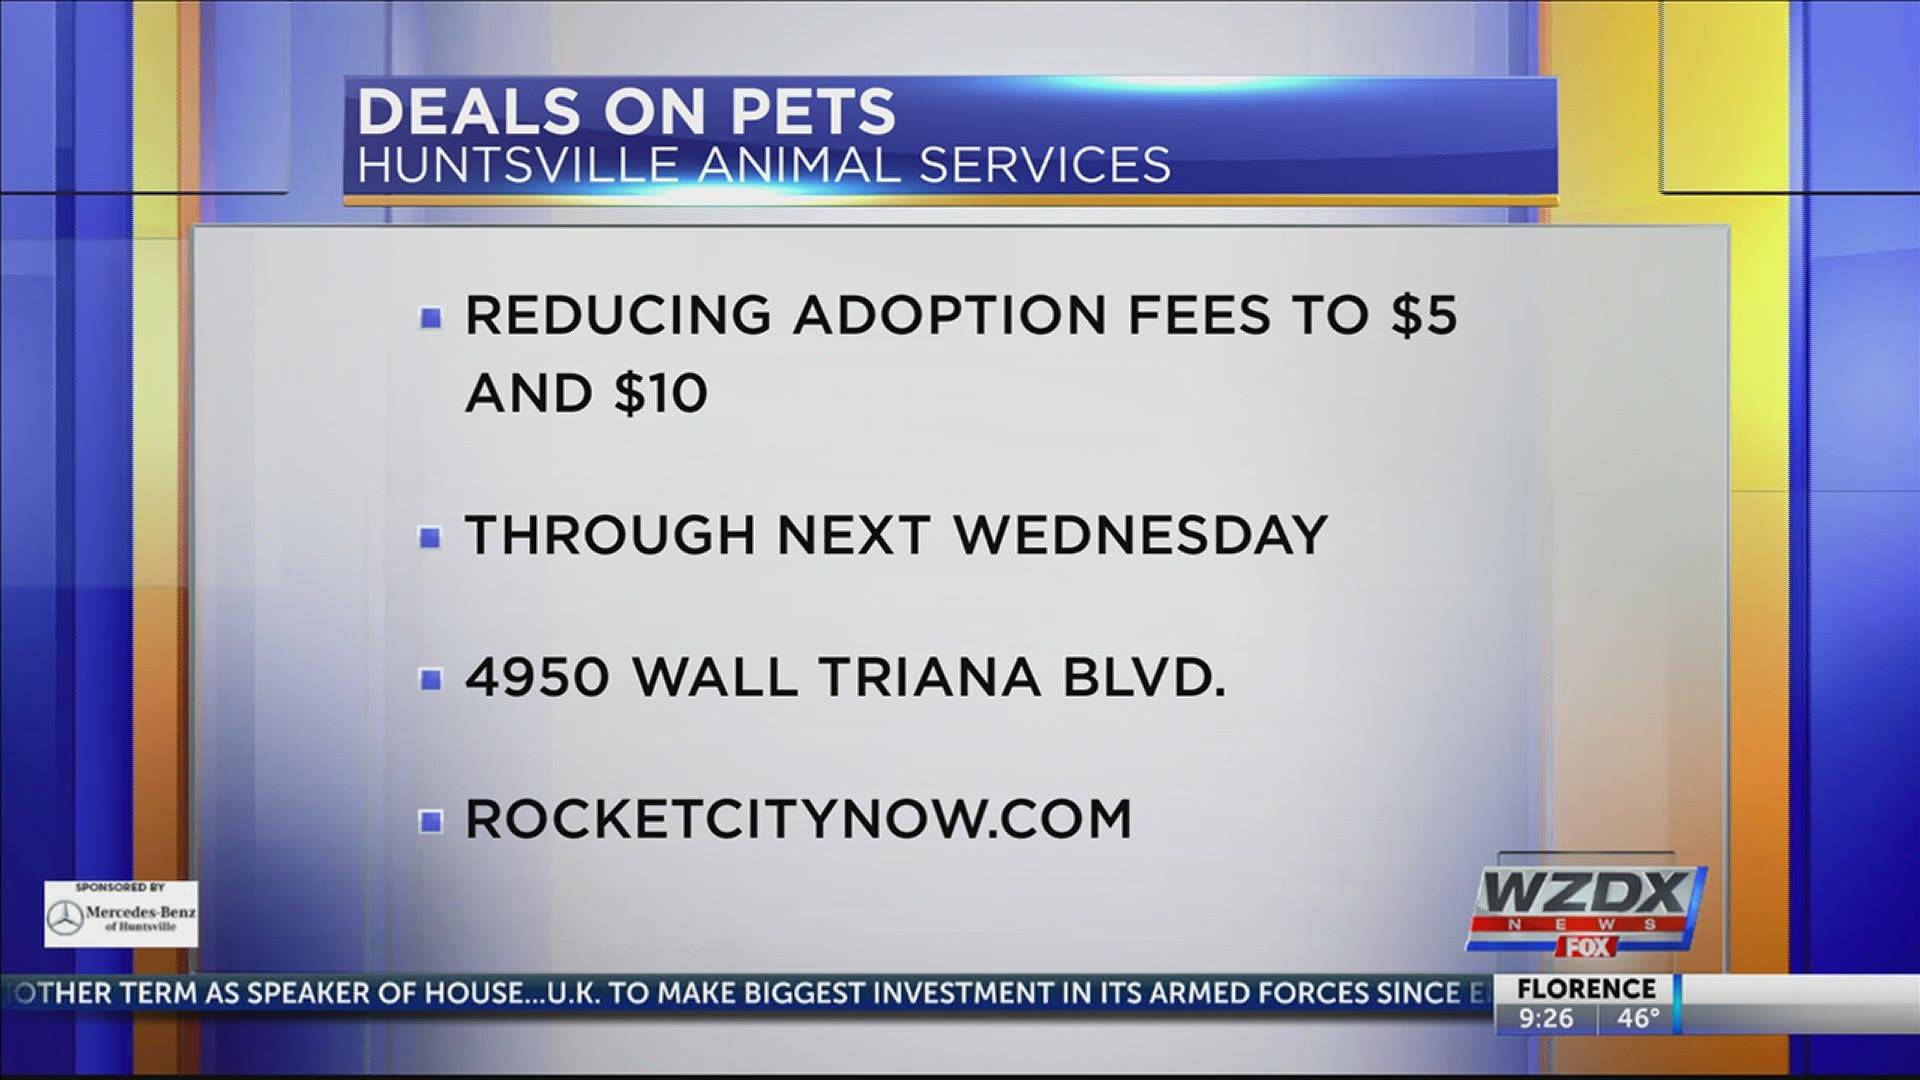 Pet adoptions include vaccinations, a microchip, city license tag, spay or neuter and free bag of pet food while supplies last.